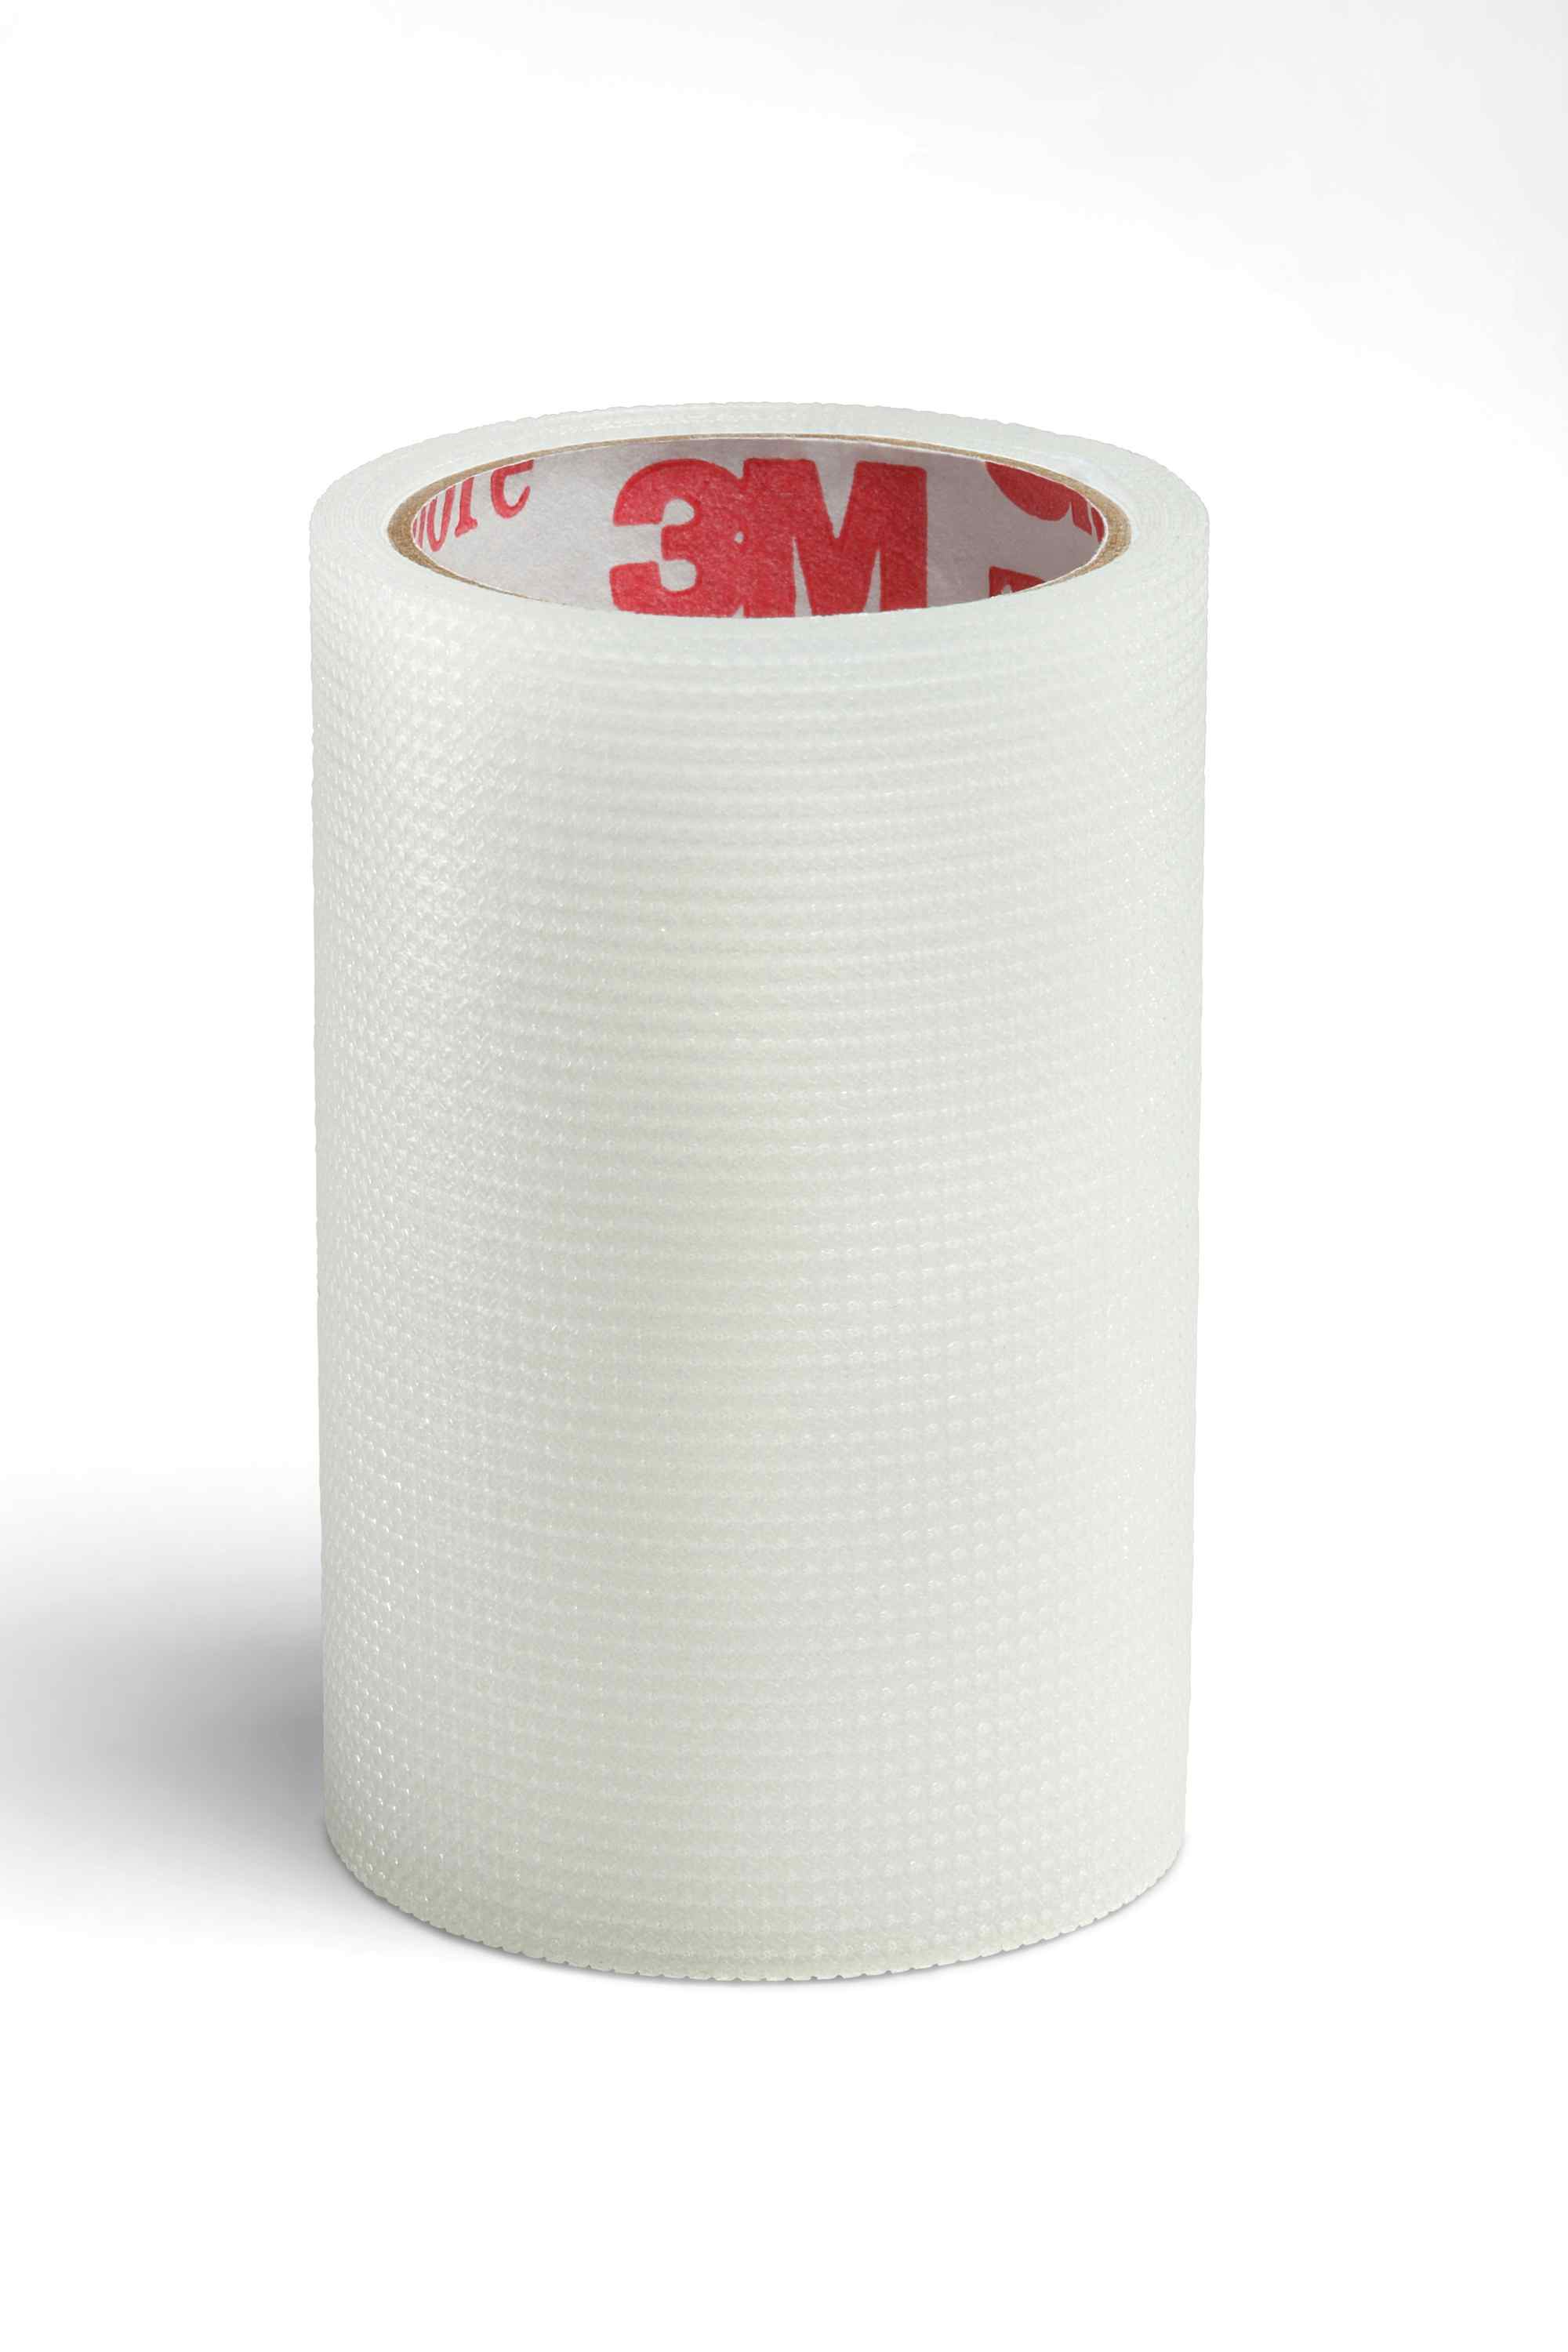 3M Transpore Water Resistant Plastic Medical Tape, 2" X 1.5 yd